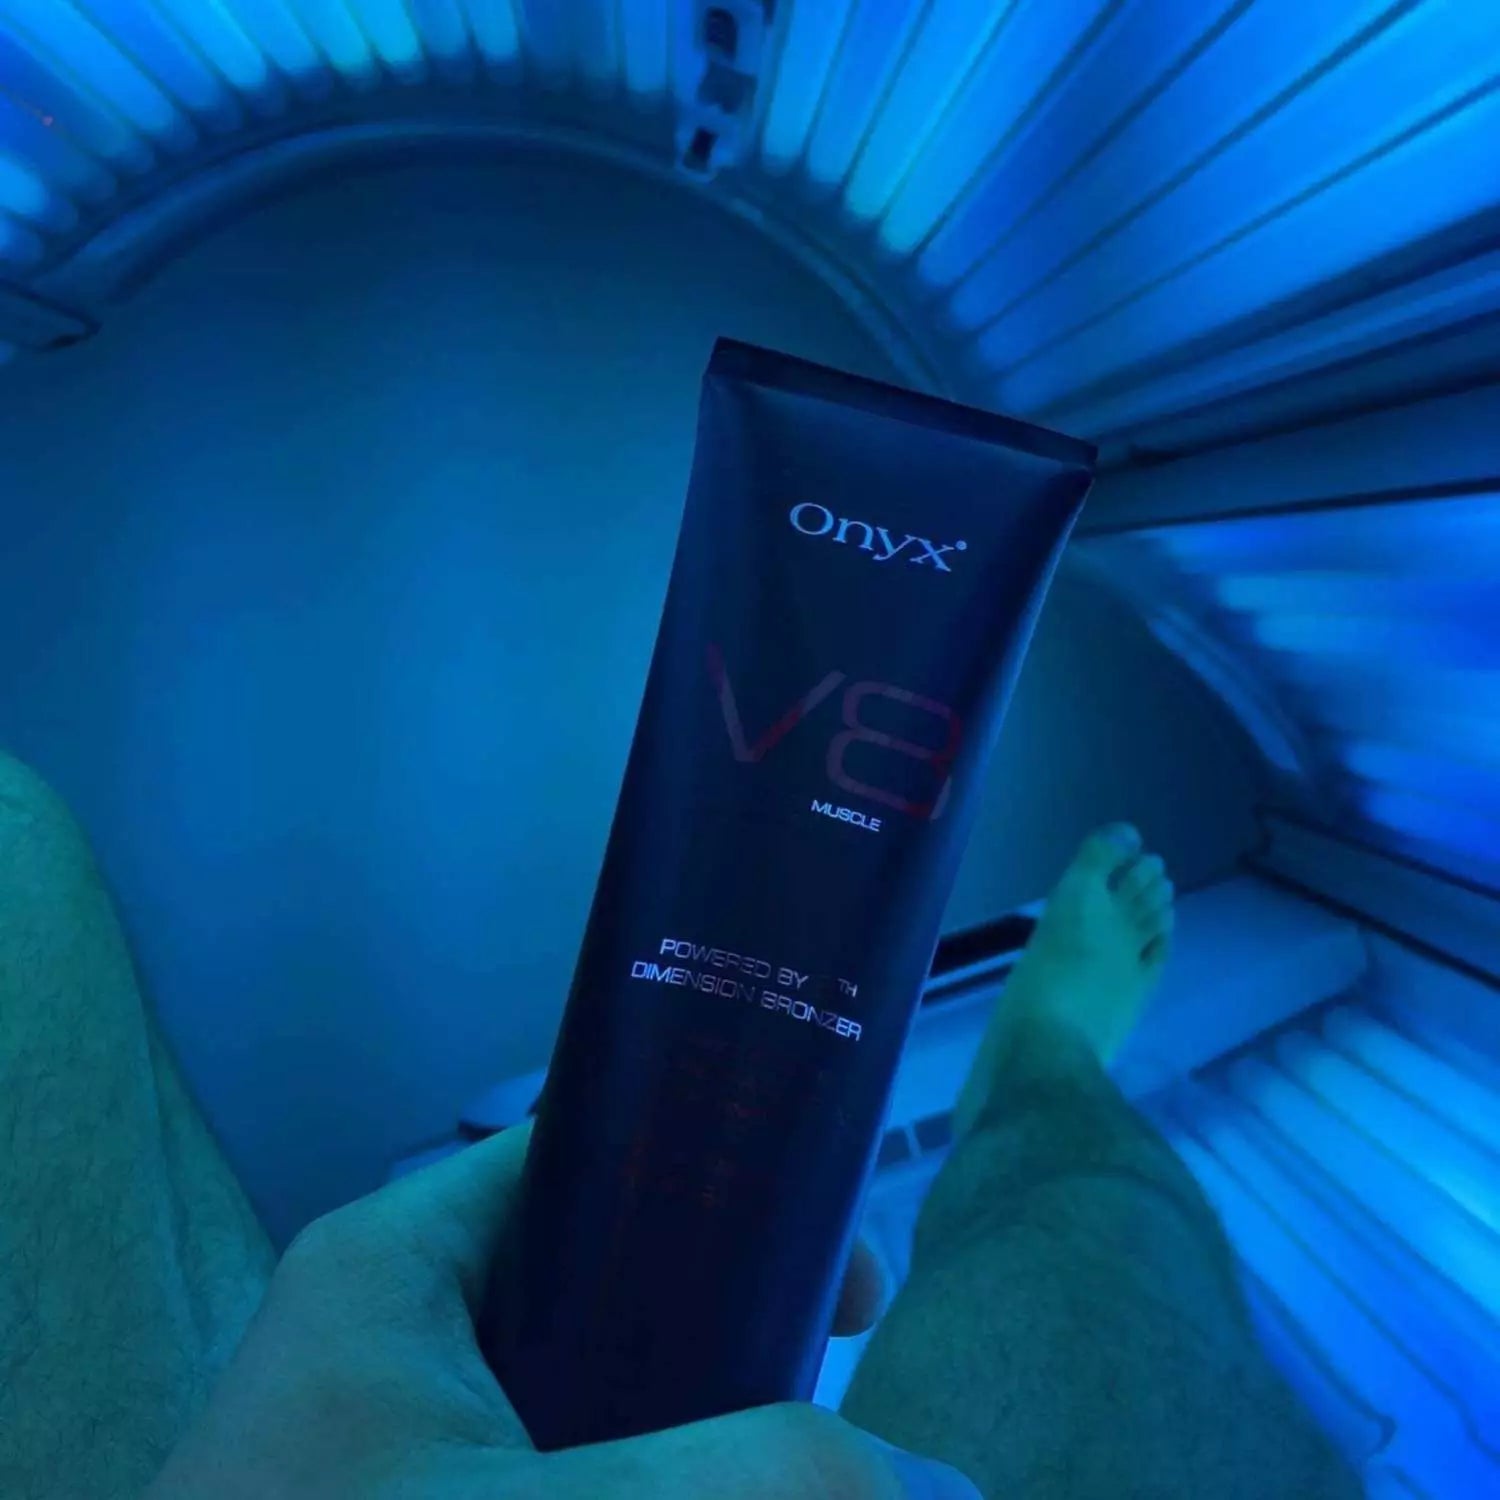 sunbed tanning lotion for indoor tanning beds tanned man